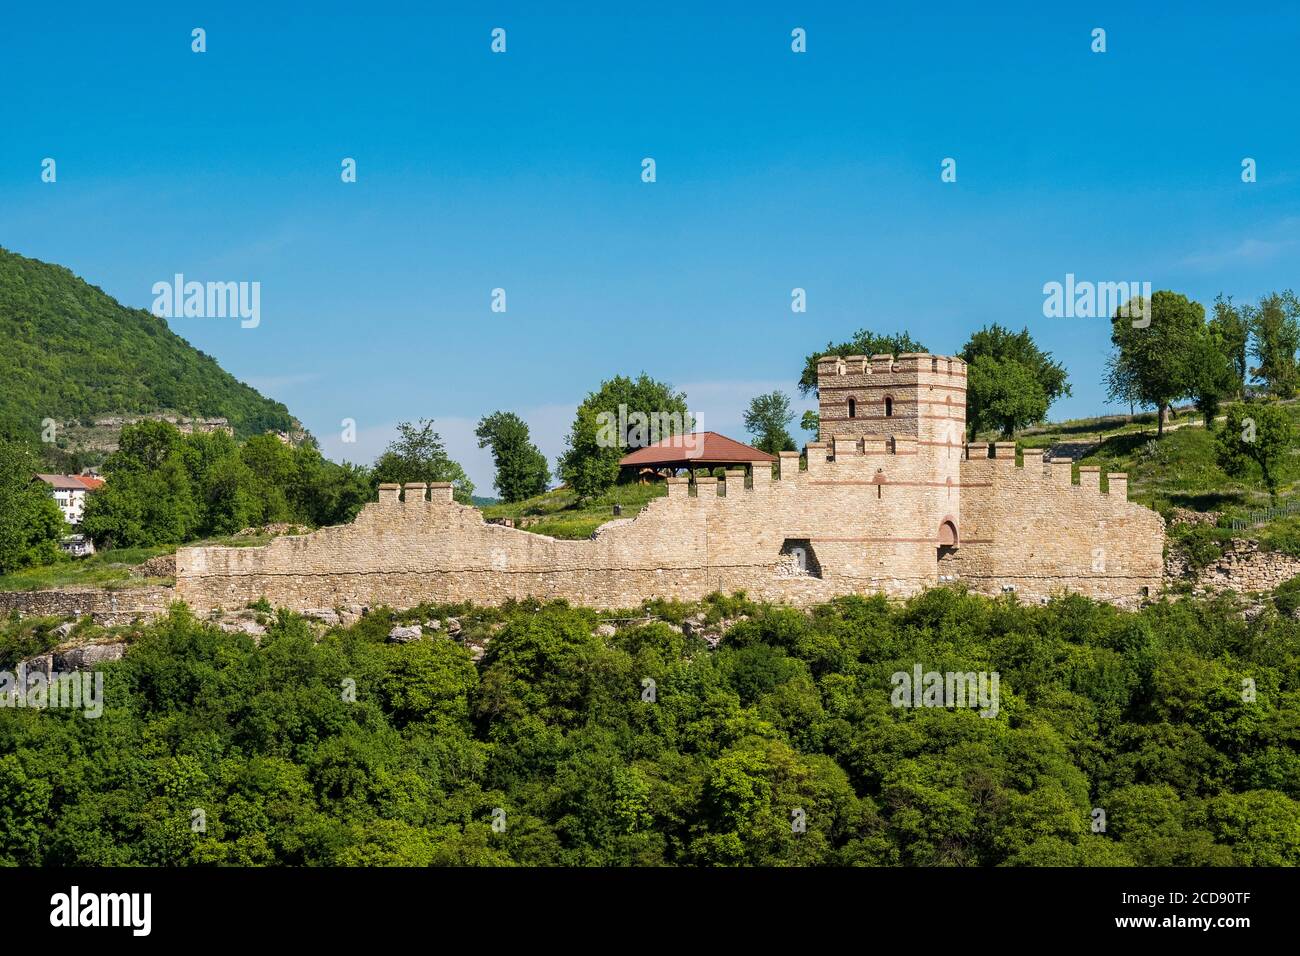 Bulgaria, Veliko Tarnovo, Ramparts of the Royal City, symbol of the glory of the Second Bulgarian Empire and the independence lost during the Ottoman invasions in Europe. Impregnable fortress, Tsarevets fell from the hands of a traitor. Stock Photo